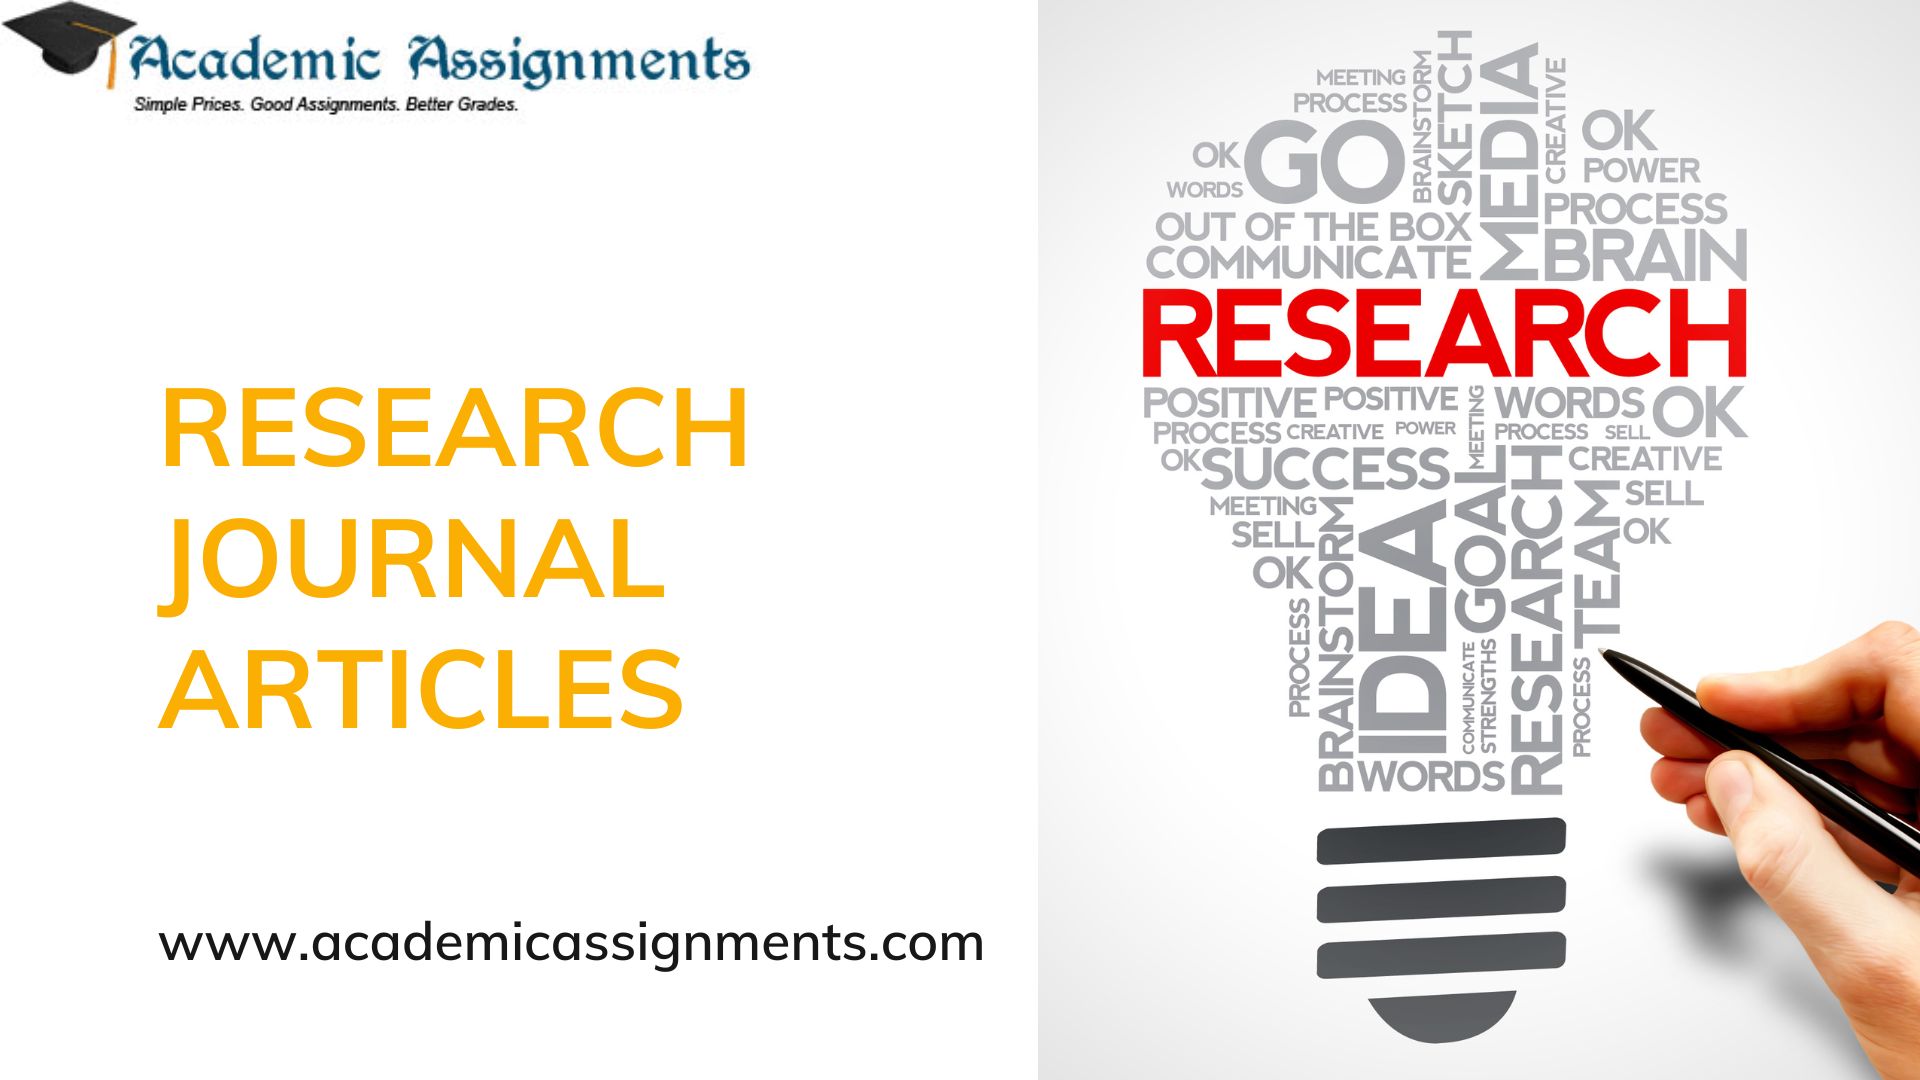 RESEARCH JOURNAL ARTICLES